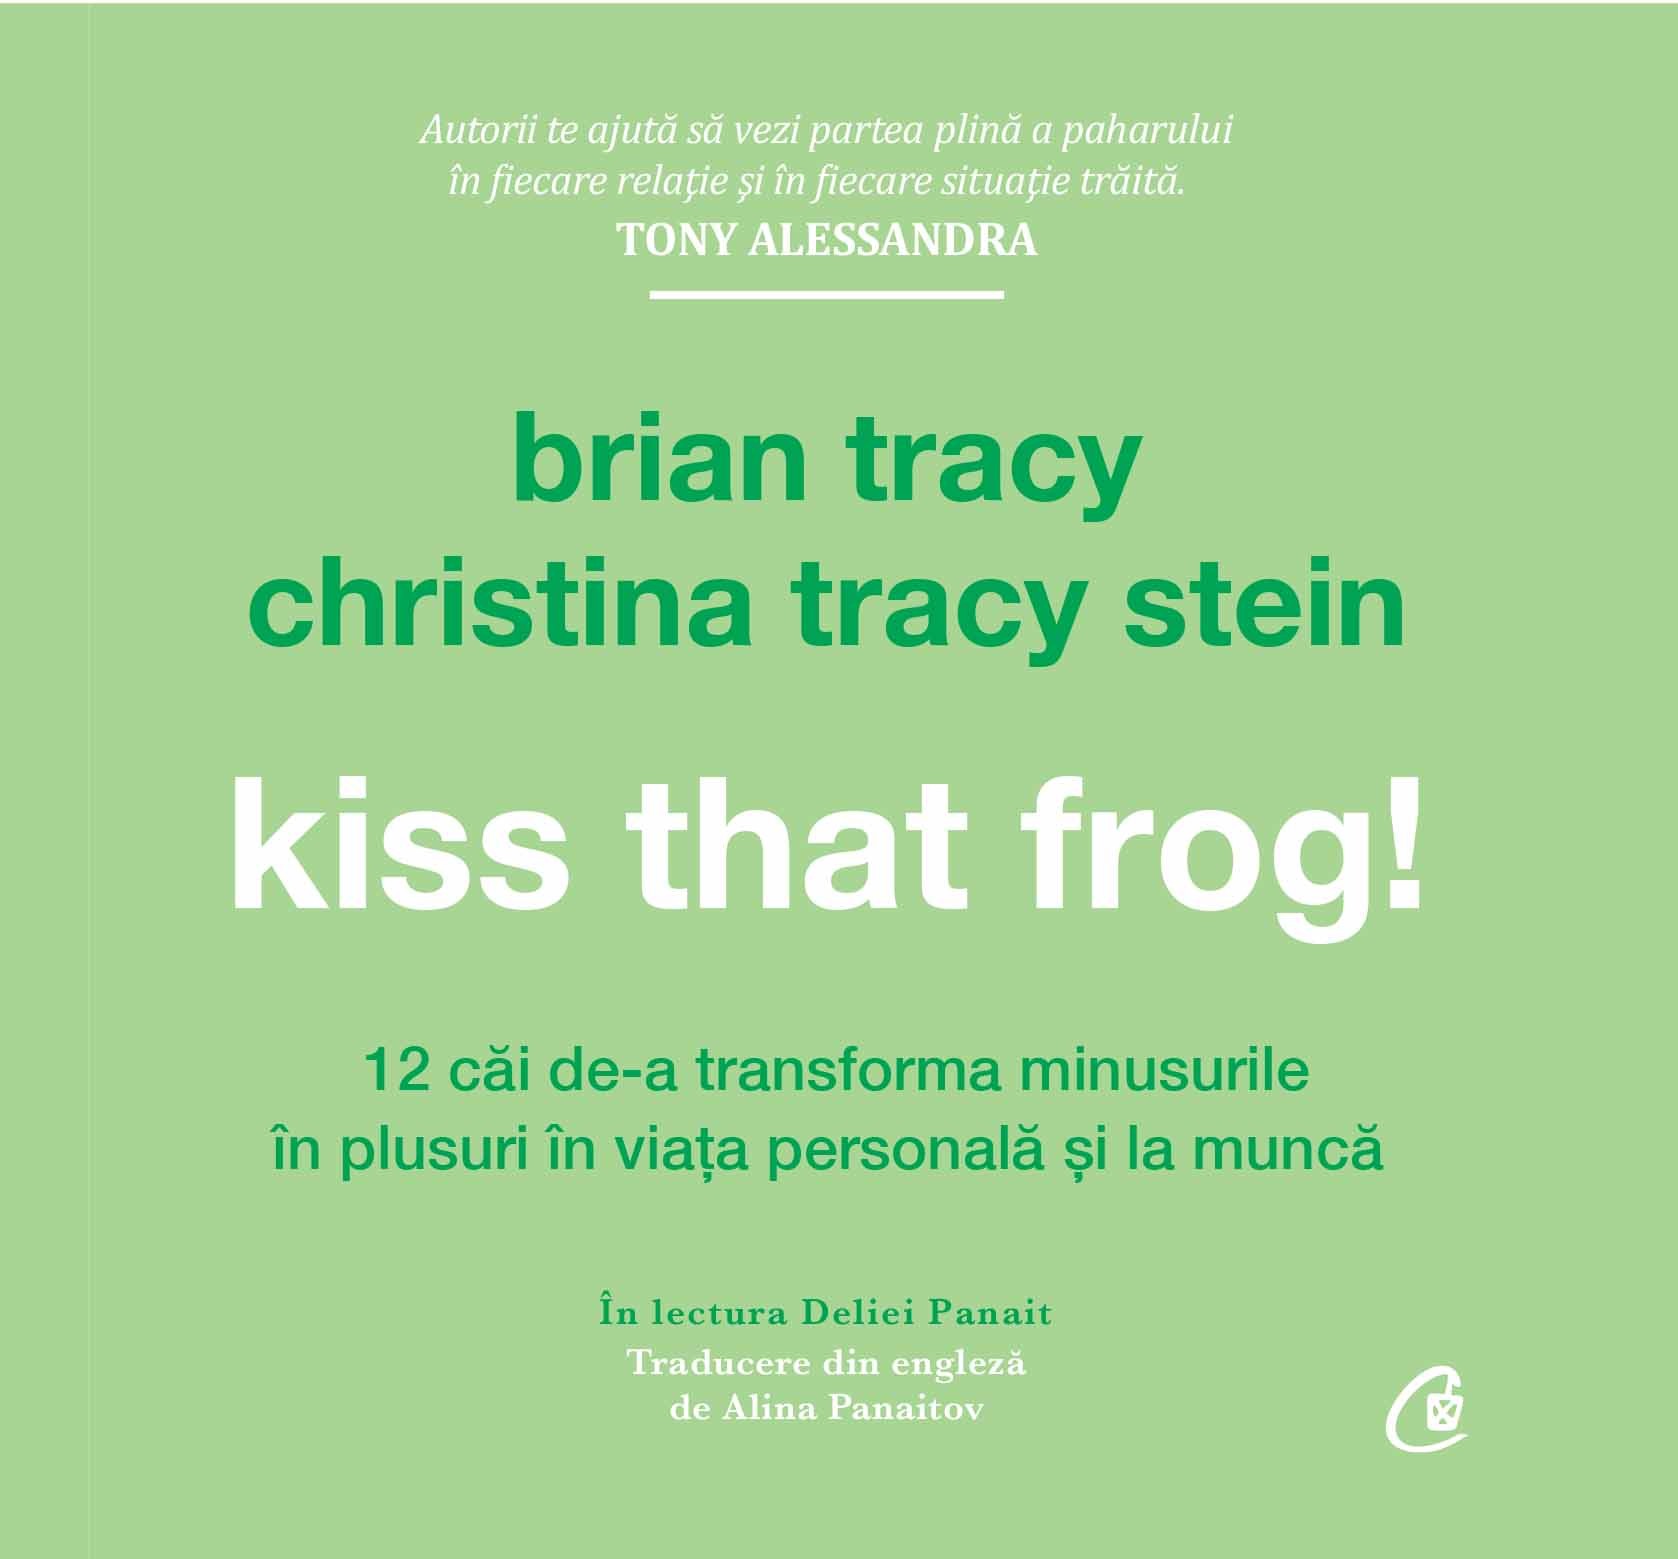 Kiss that frog! – Audiobook | Brian Tracy, Christina Tracy Stein Brian Tracy 2022